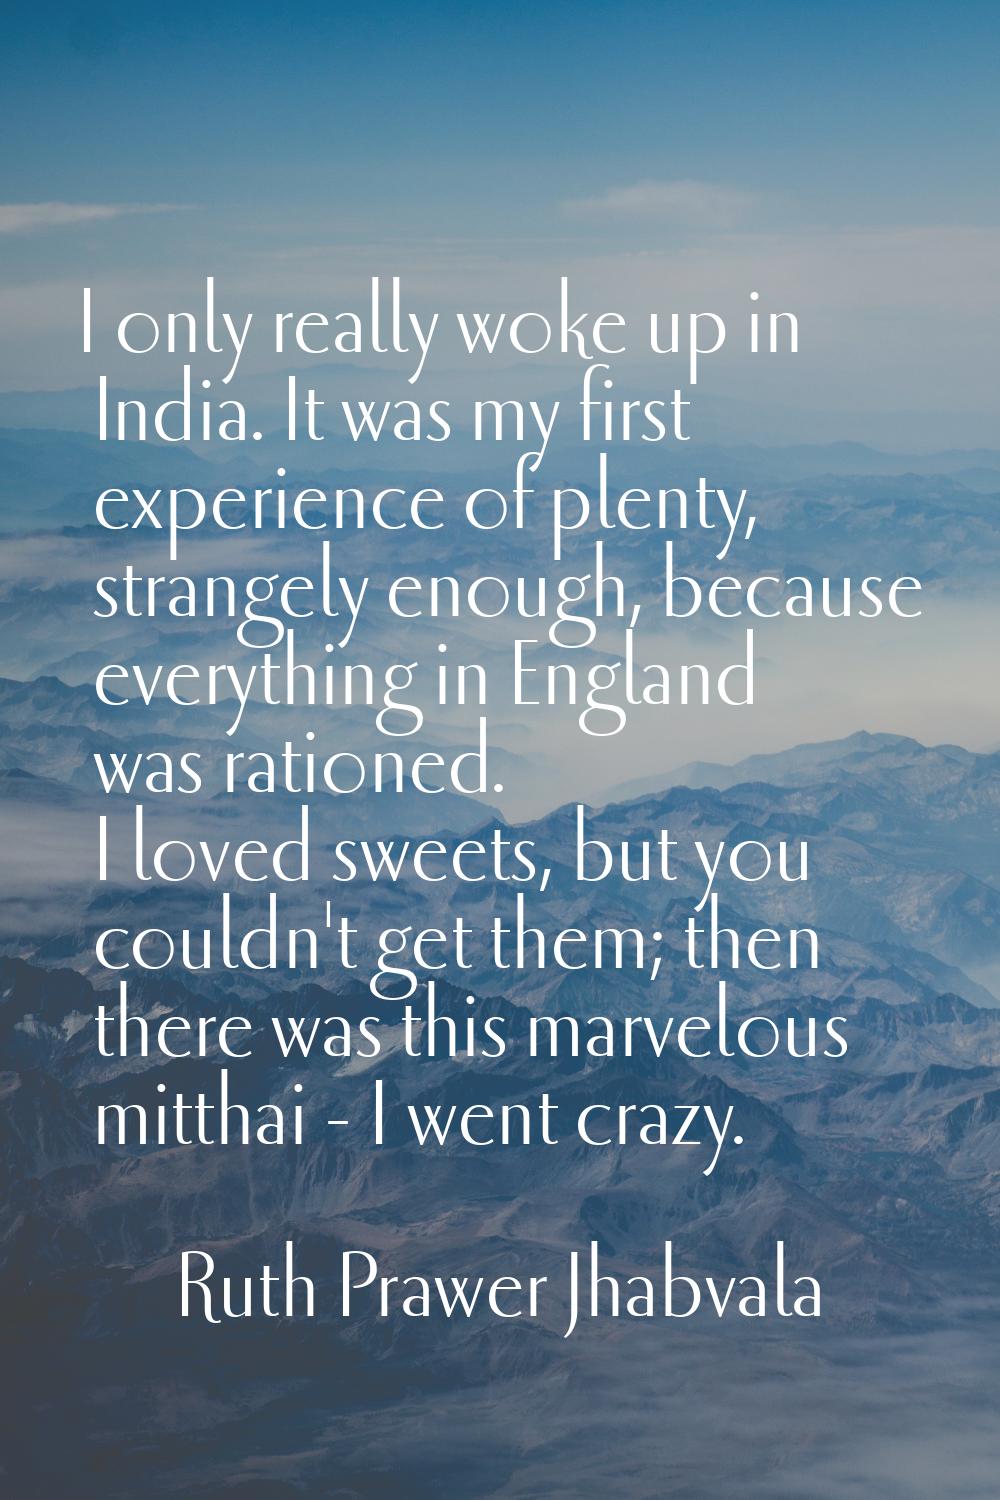 I only really woke up in India. It was my first experience of plenty, strangely enough, because eve